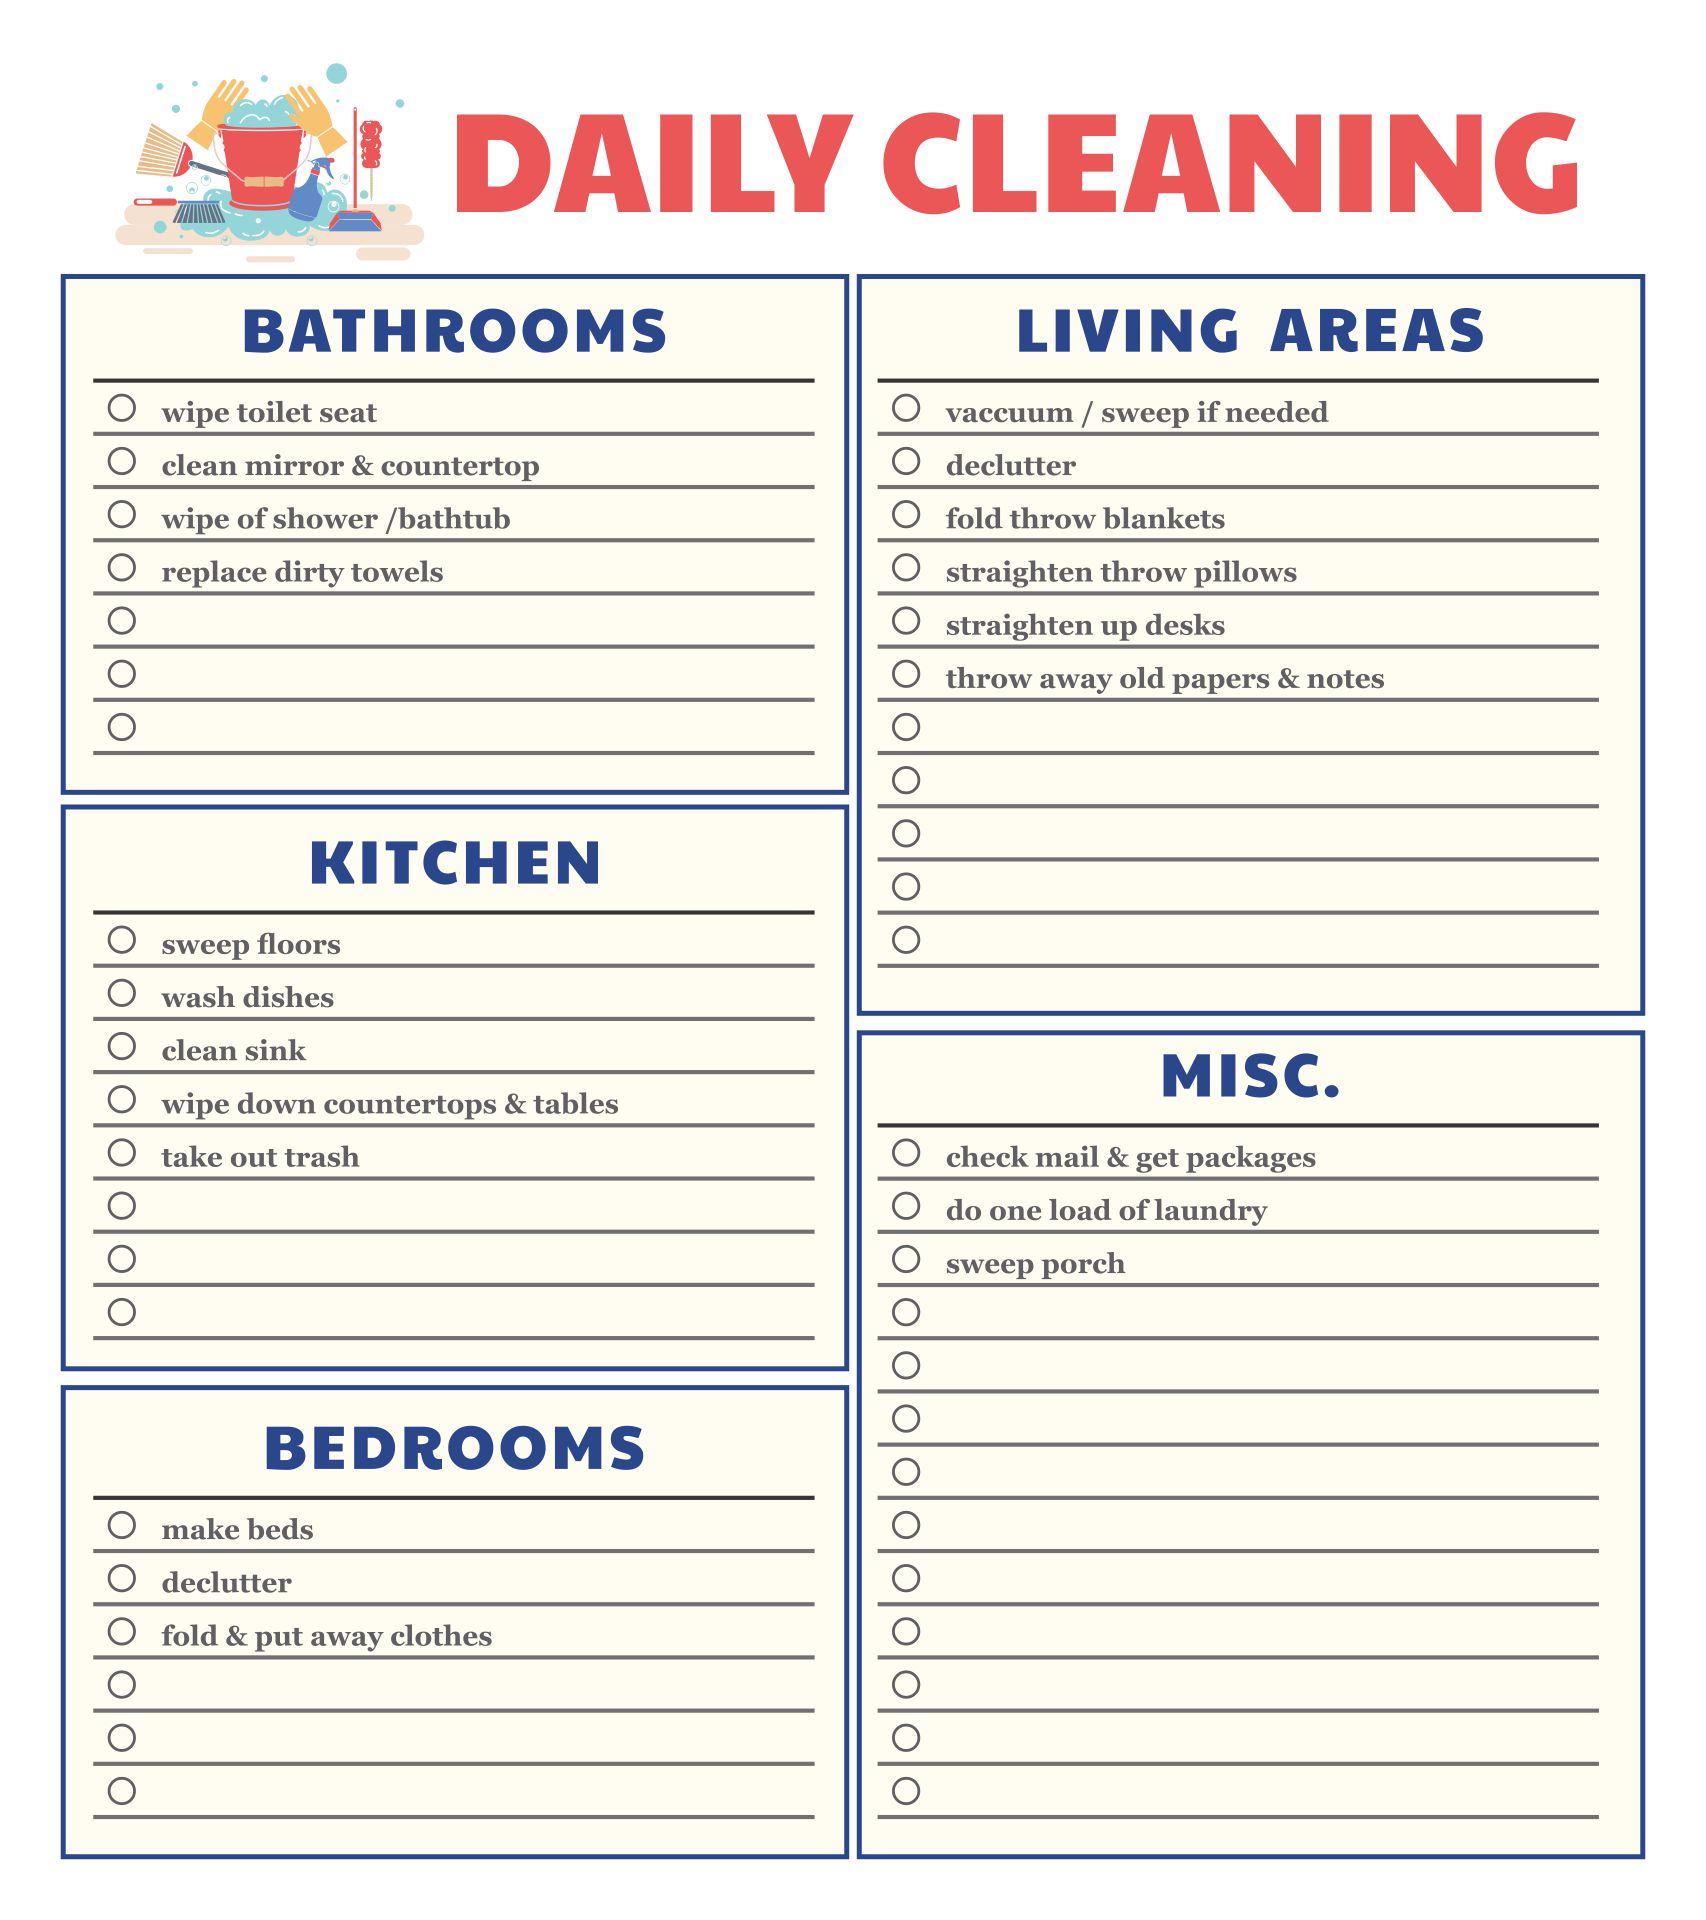 8-best-images-of-printable-house-cleaning-charts-daily-house-cleaning